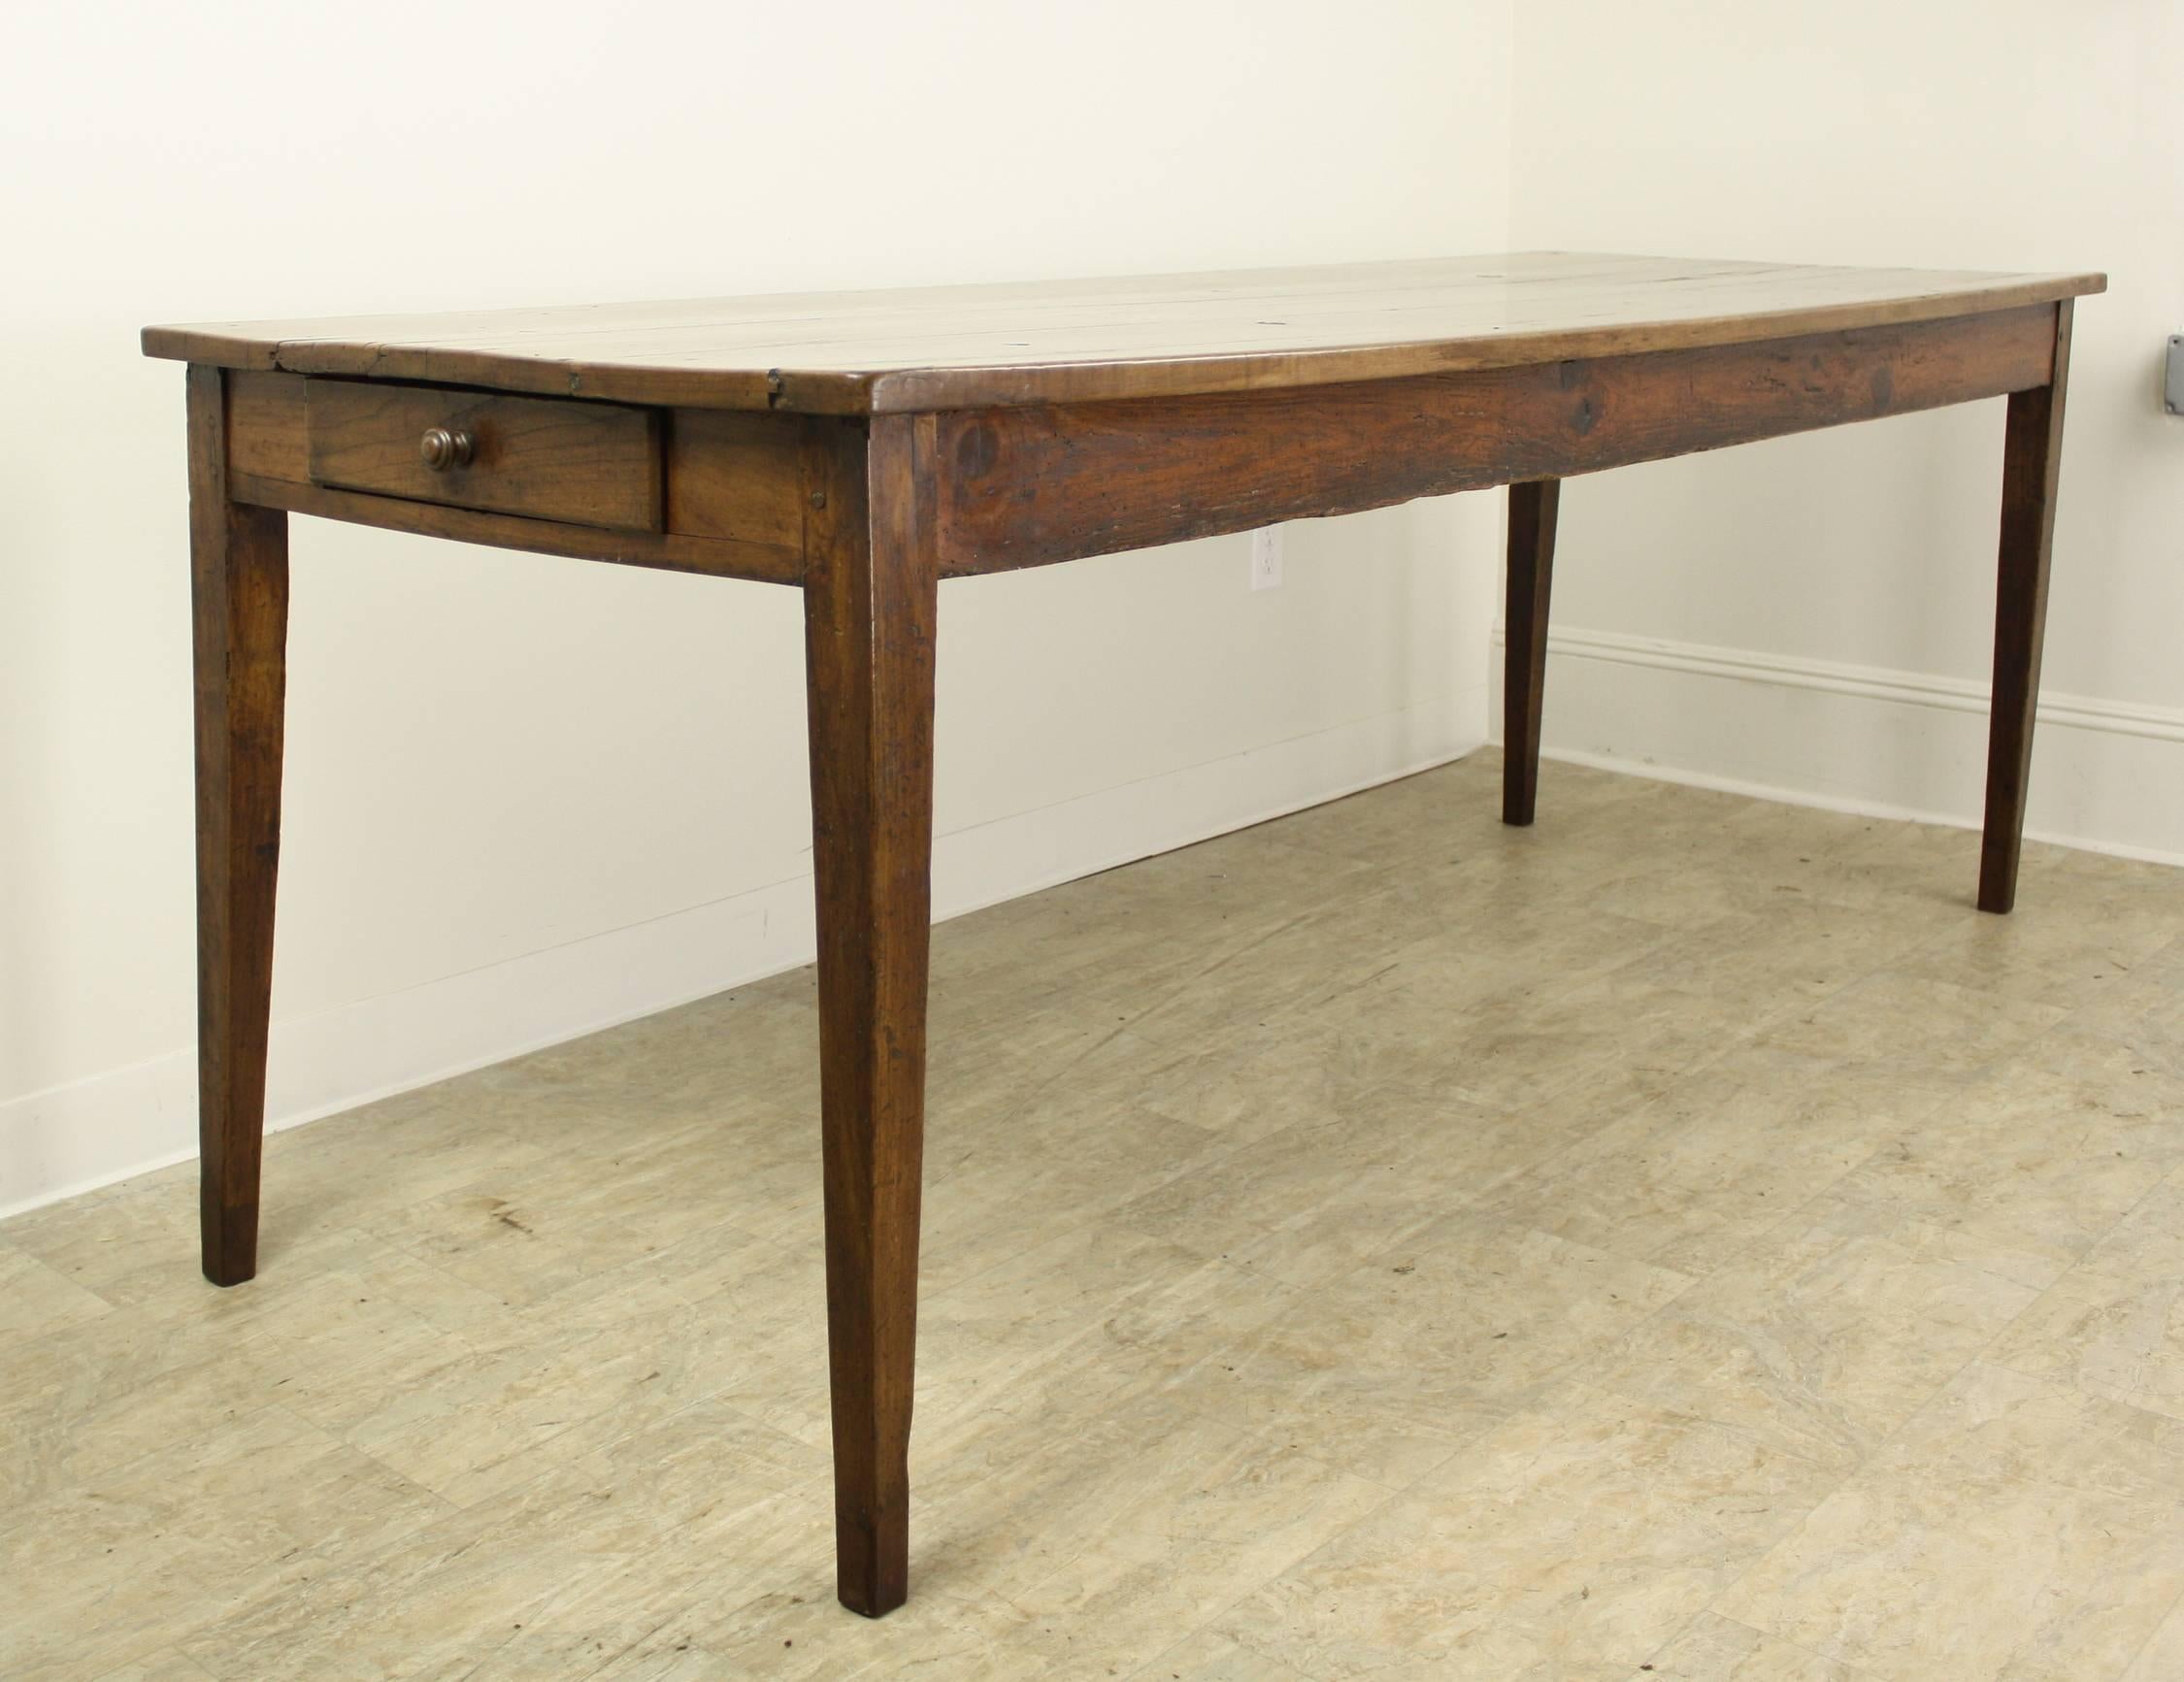 A splendid cherry farm table with warm color and gorgeous patina. The table top has several wonderful knotholes and naturalistic features, which gives the piece great character. Elegant tapered legs and a single drawer at the end complete the look.